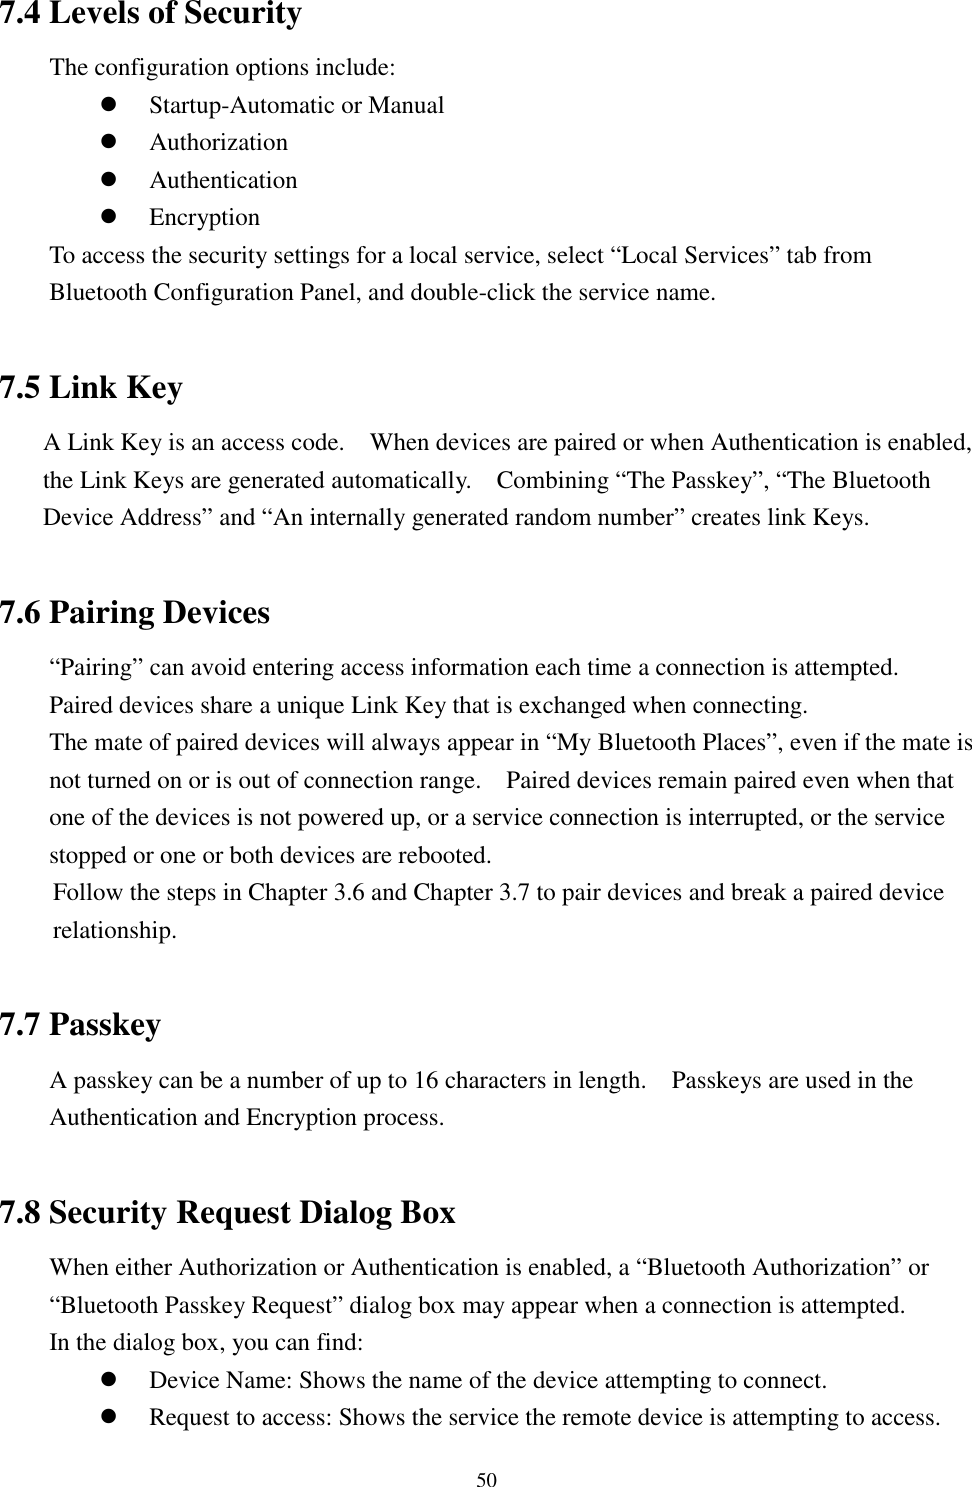 507.4 Levels of SecurityThe configuration options include:! Startup-Automatic or Manual! Authorization! Authentication! EncryptionTo access the security settings for a local service, select “Local Services” tab fromBluetooth Configuration Panel, and double-click the service name.7.5 Link KeyA Link Key is an access code.    When devices are paired or when Authentication is enabled,the Link Keys are generated automatically.    Combining “The Passkey”, “The BluetoothDevice Address” and “An internally generated random number” creates link Keys.7.6 Pairing Devices“Pairing” can avoid entering access information each time a connection is attempted.Paired devices share a unique Link Key that is exchanged when connecting.The mate of paired devices will always appear in “My Bluetooth Places”, even if the mate isnot turned on or is out of connection range.    Paired devices remain paired even when thatone of the devices is not powered up, or a service connection is interrupted, or the servicestopped or one or both devices are rebooted.Follow the steps in Chapter 3.6 and Chapter 3.7 to pair devices and break a paired devicerelationship.7.7 PasskeyA passkey can be a number of up to 16 characters in length.    Passkeys are used in theAuthentication and Encryption process.7.8 Security Request Dialog BoxWhen either Authorization or Authentication is enabled, a “Bluetooth Authorization” or“Bluetooth Passkey Request” dialog box may appear when a connection is attempted.In the dialog box, you can find:! Device Name: Shows the name of the device attempting to connect.! Request to access: Shows the service the remote device is attempting to access.